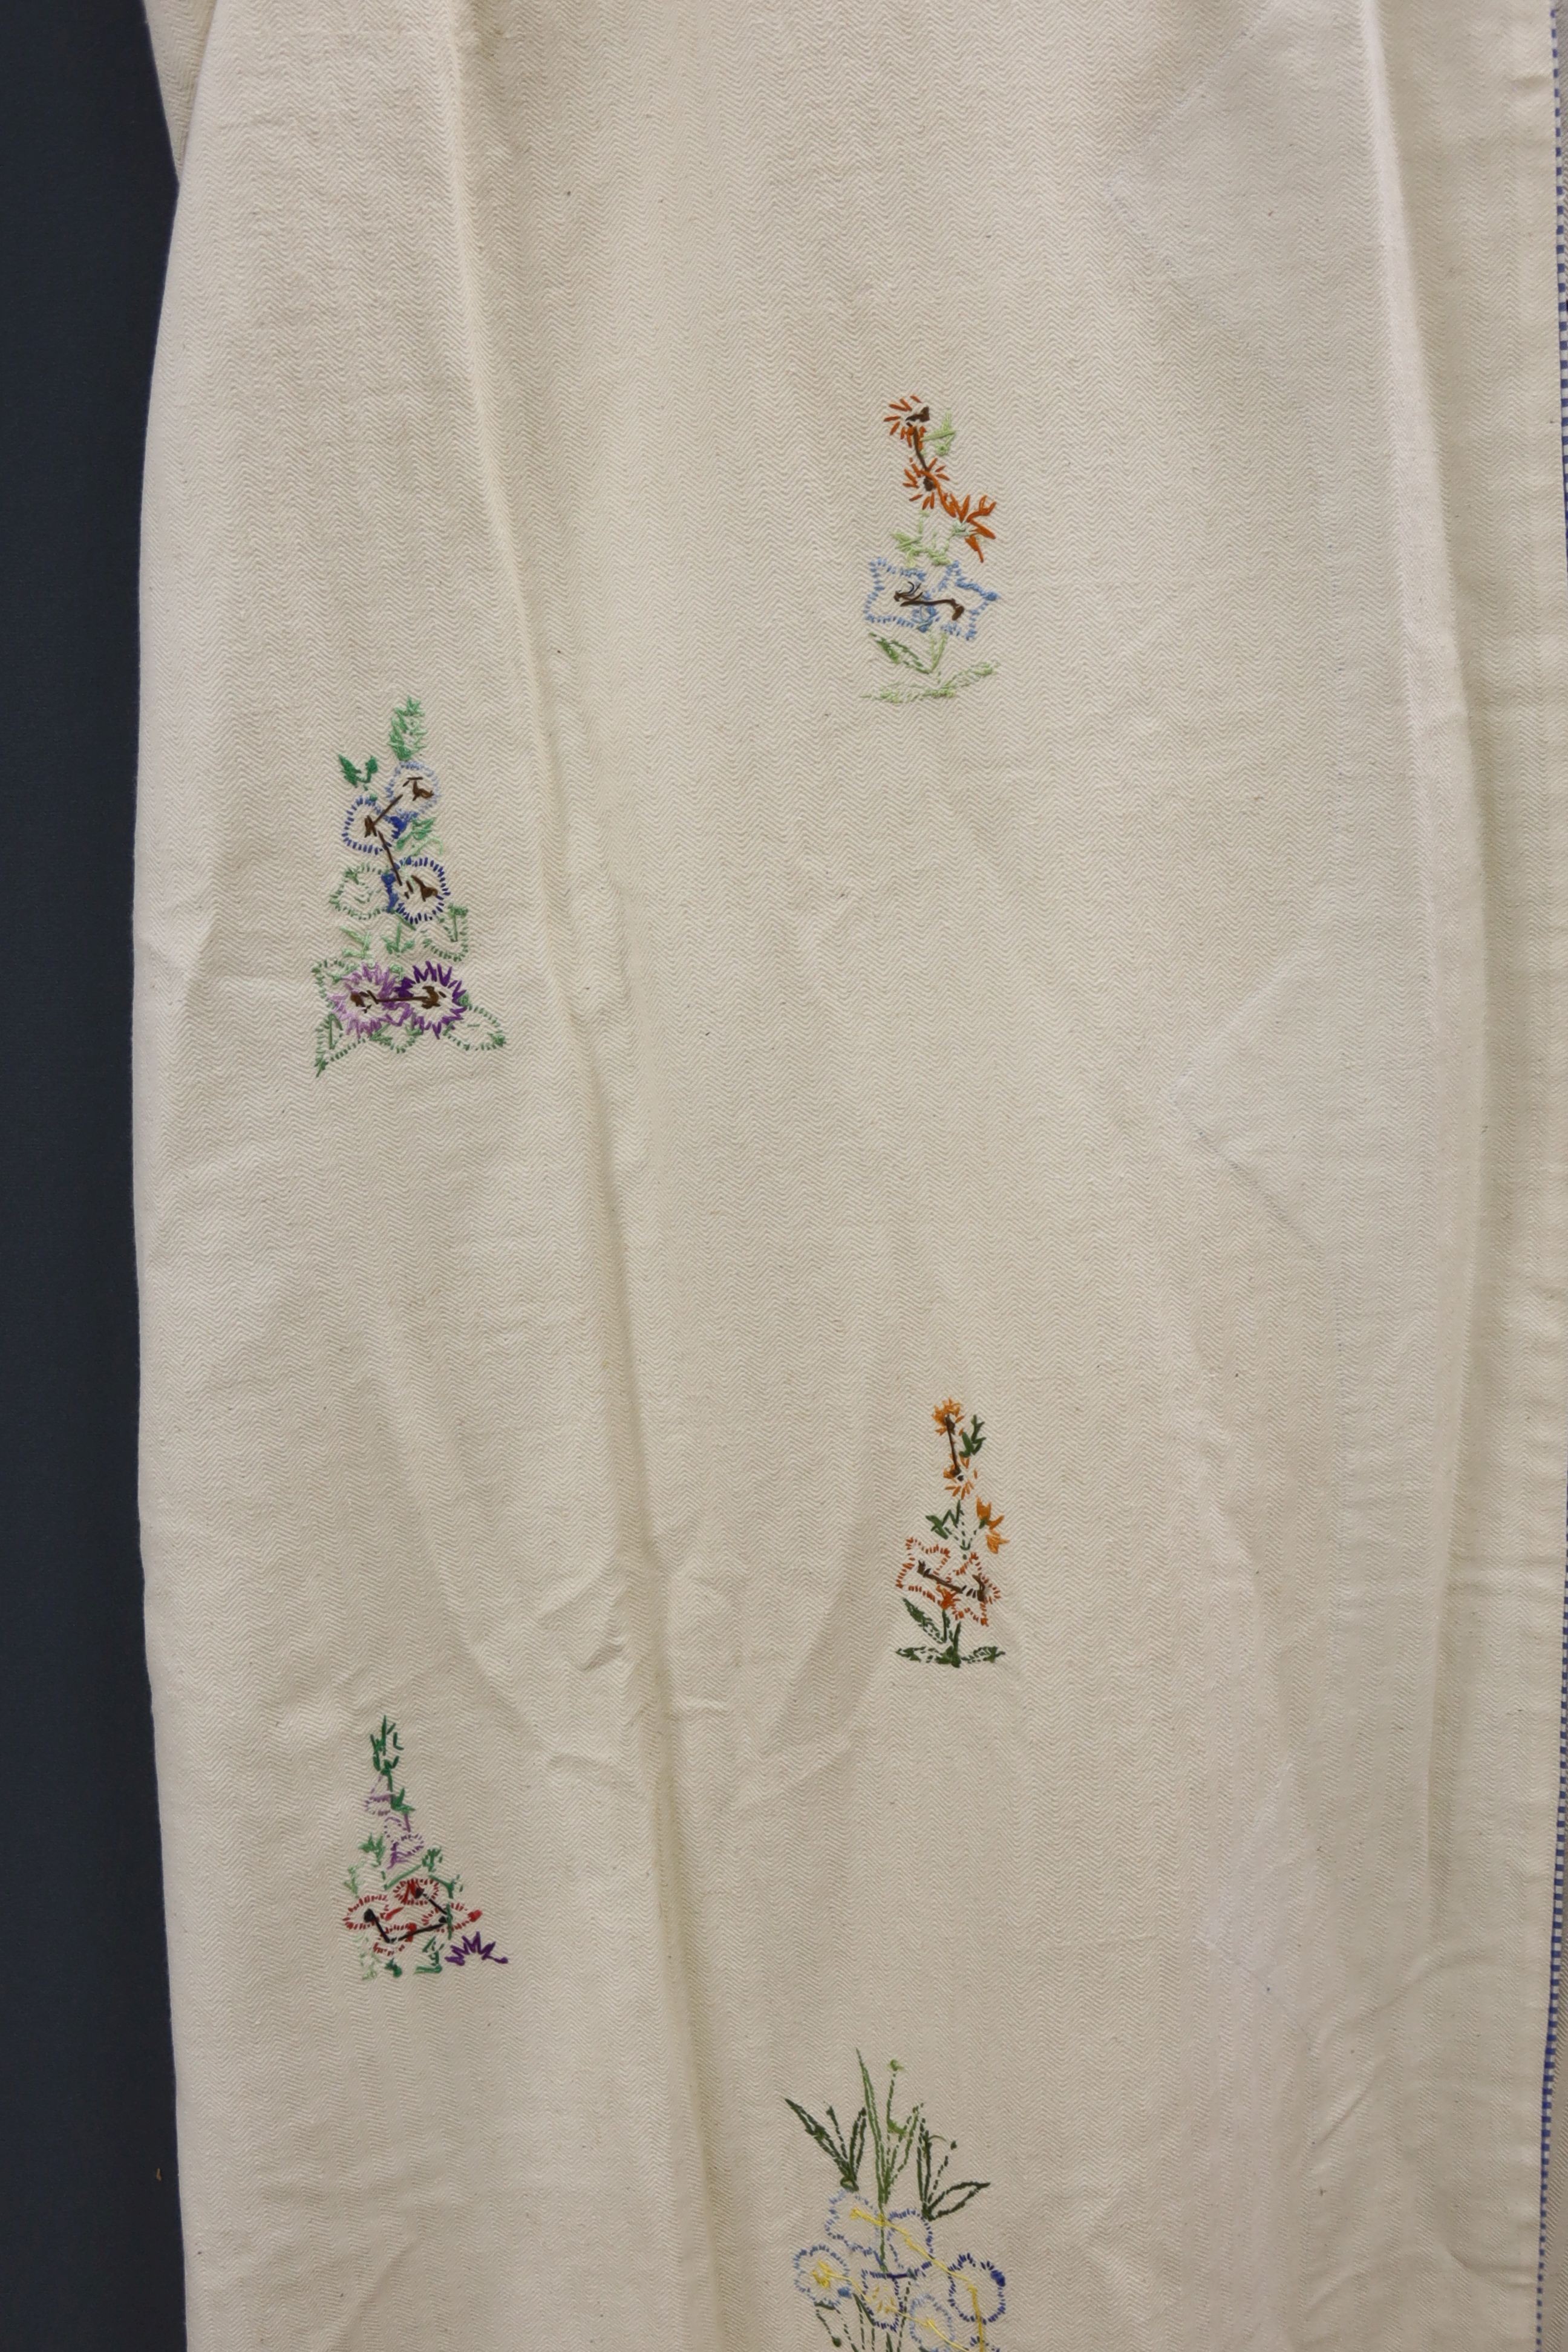 Two embroidered and appliquéd bed covers designed with ladies wearing crinoline dresses